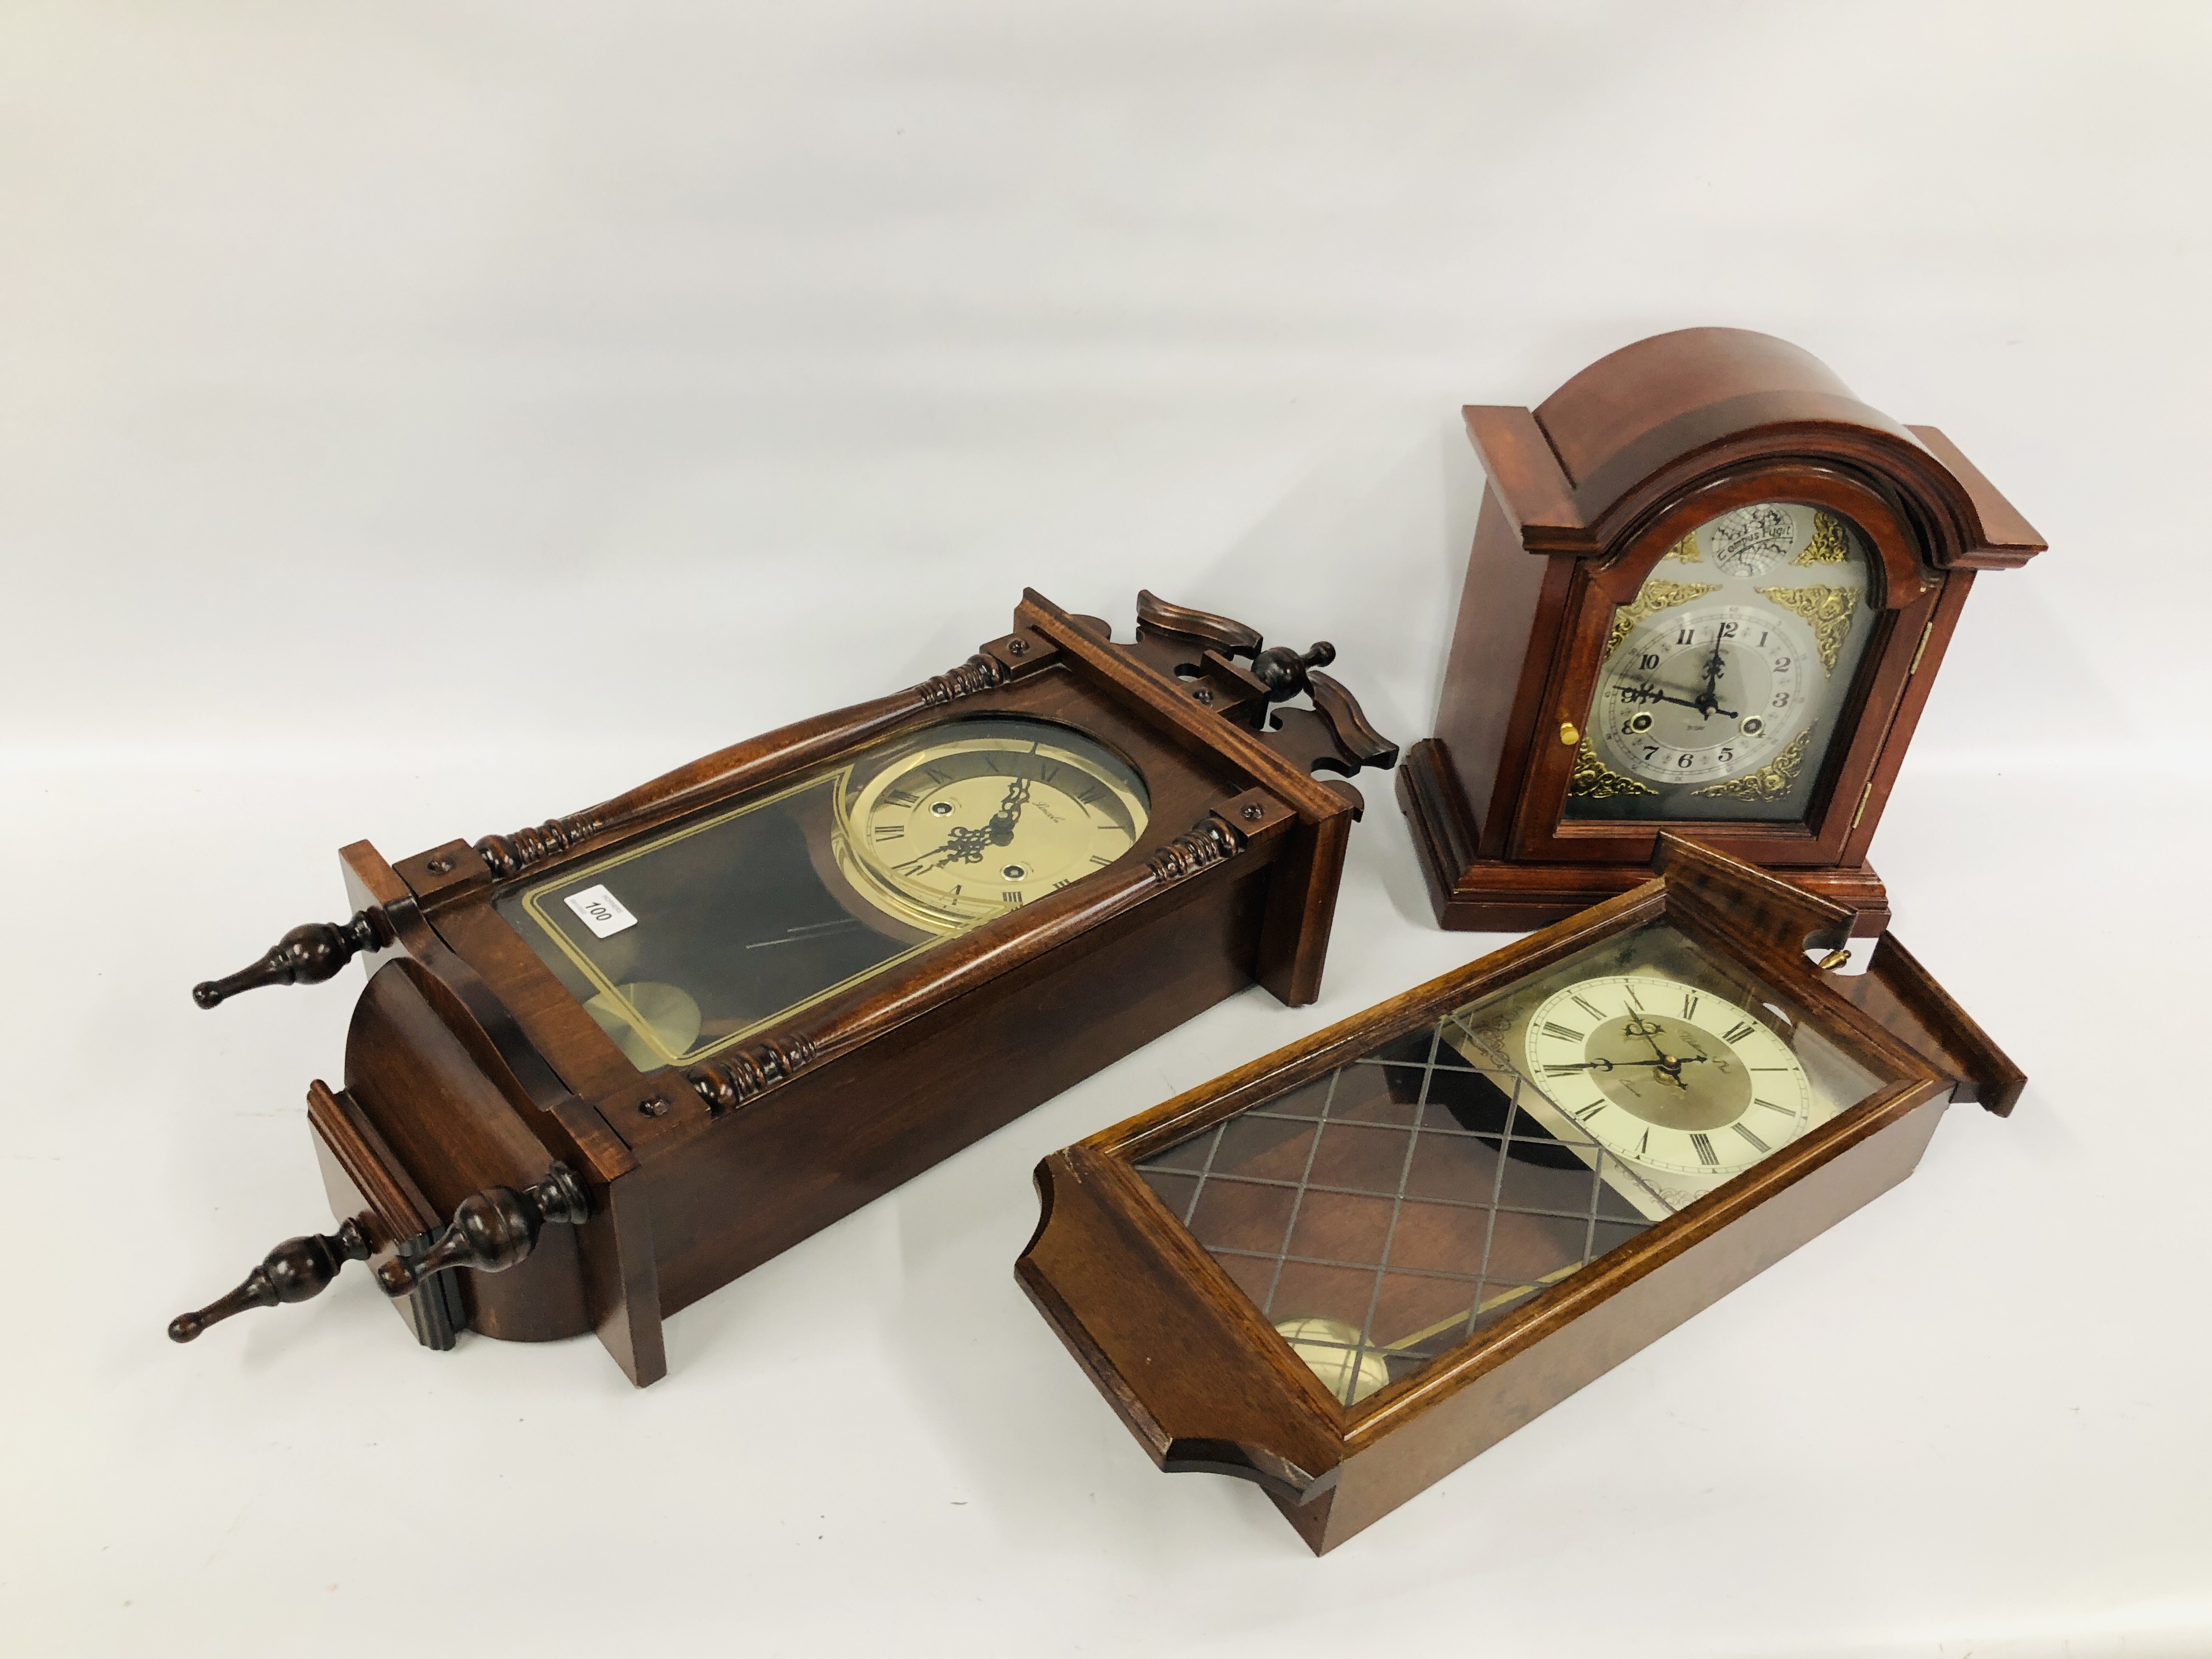 MODERN MAHOGANY FINISH MANTEL CLOCK ALONG WITH TWO WALL CLOCKS ONE MARKED LINCOLN THE OTHER WILLIAM